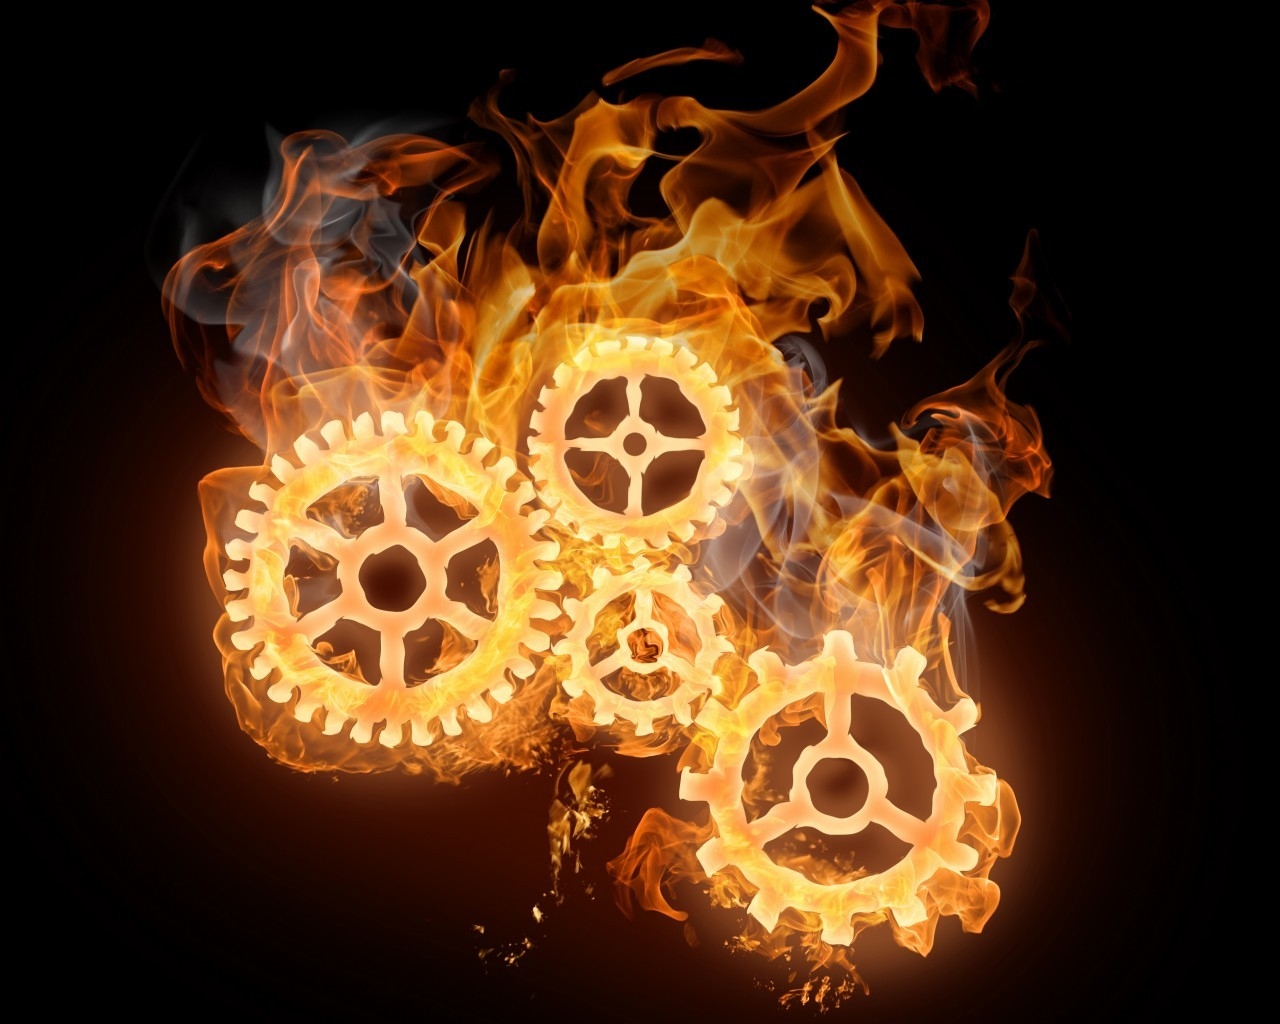 Wheels on Fire for 1280 x 1024 resolution